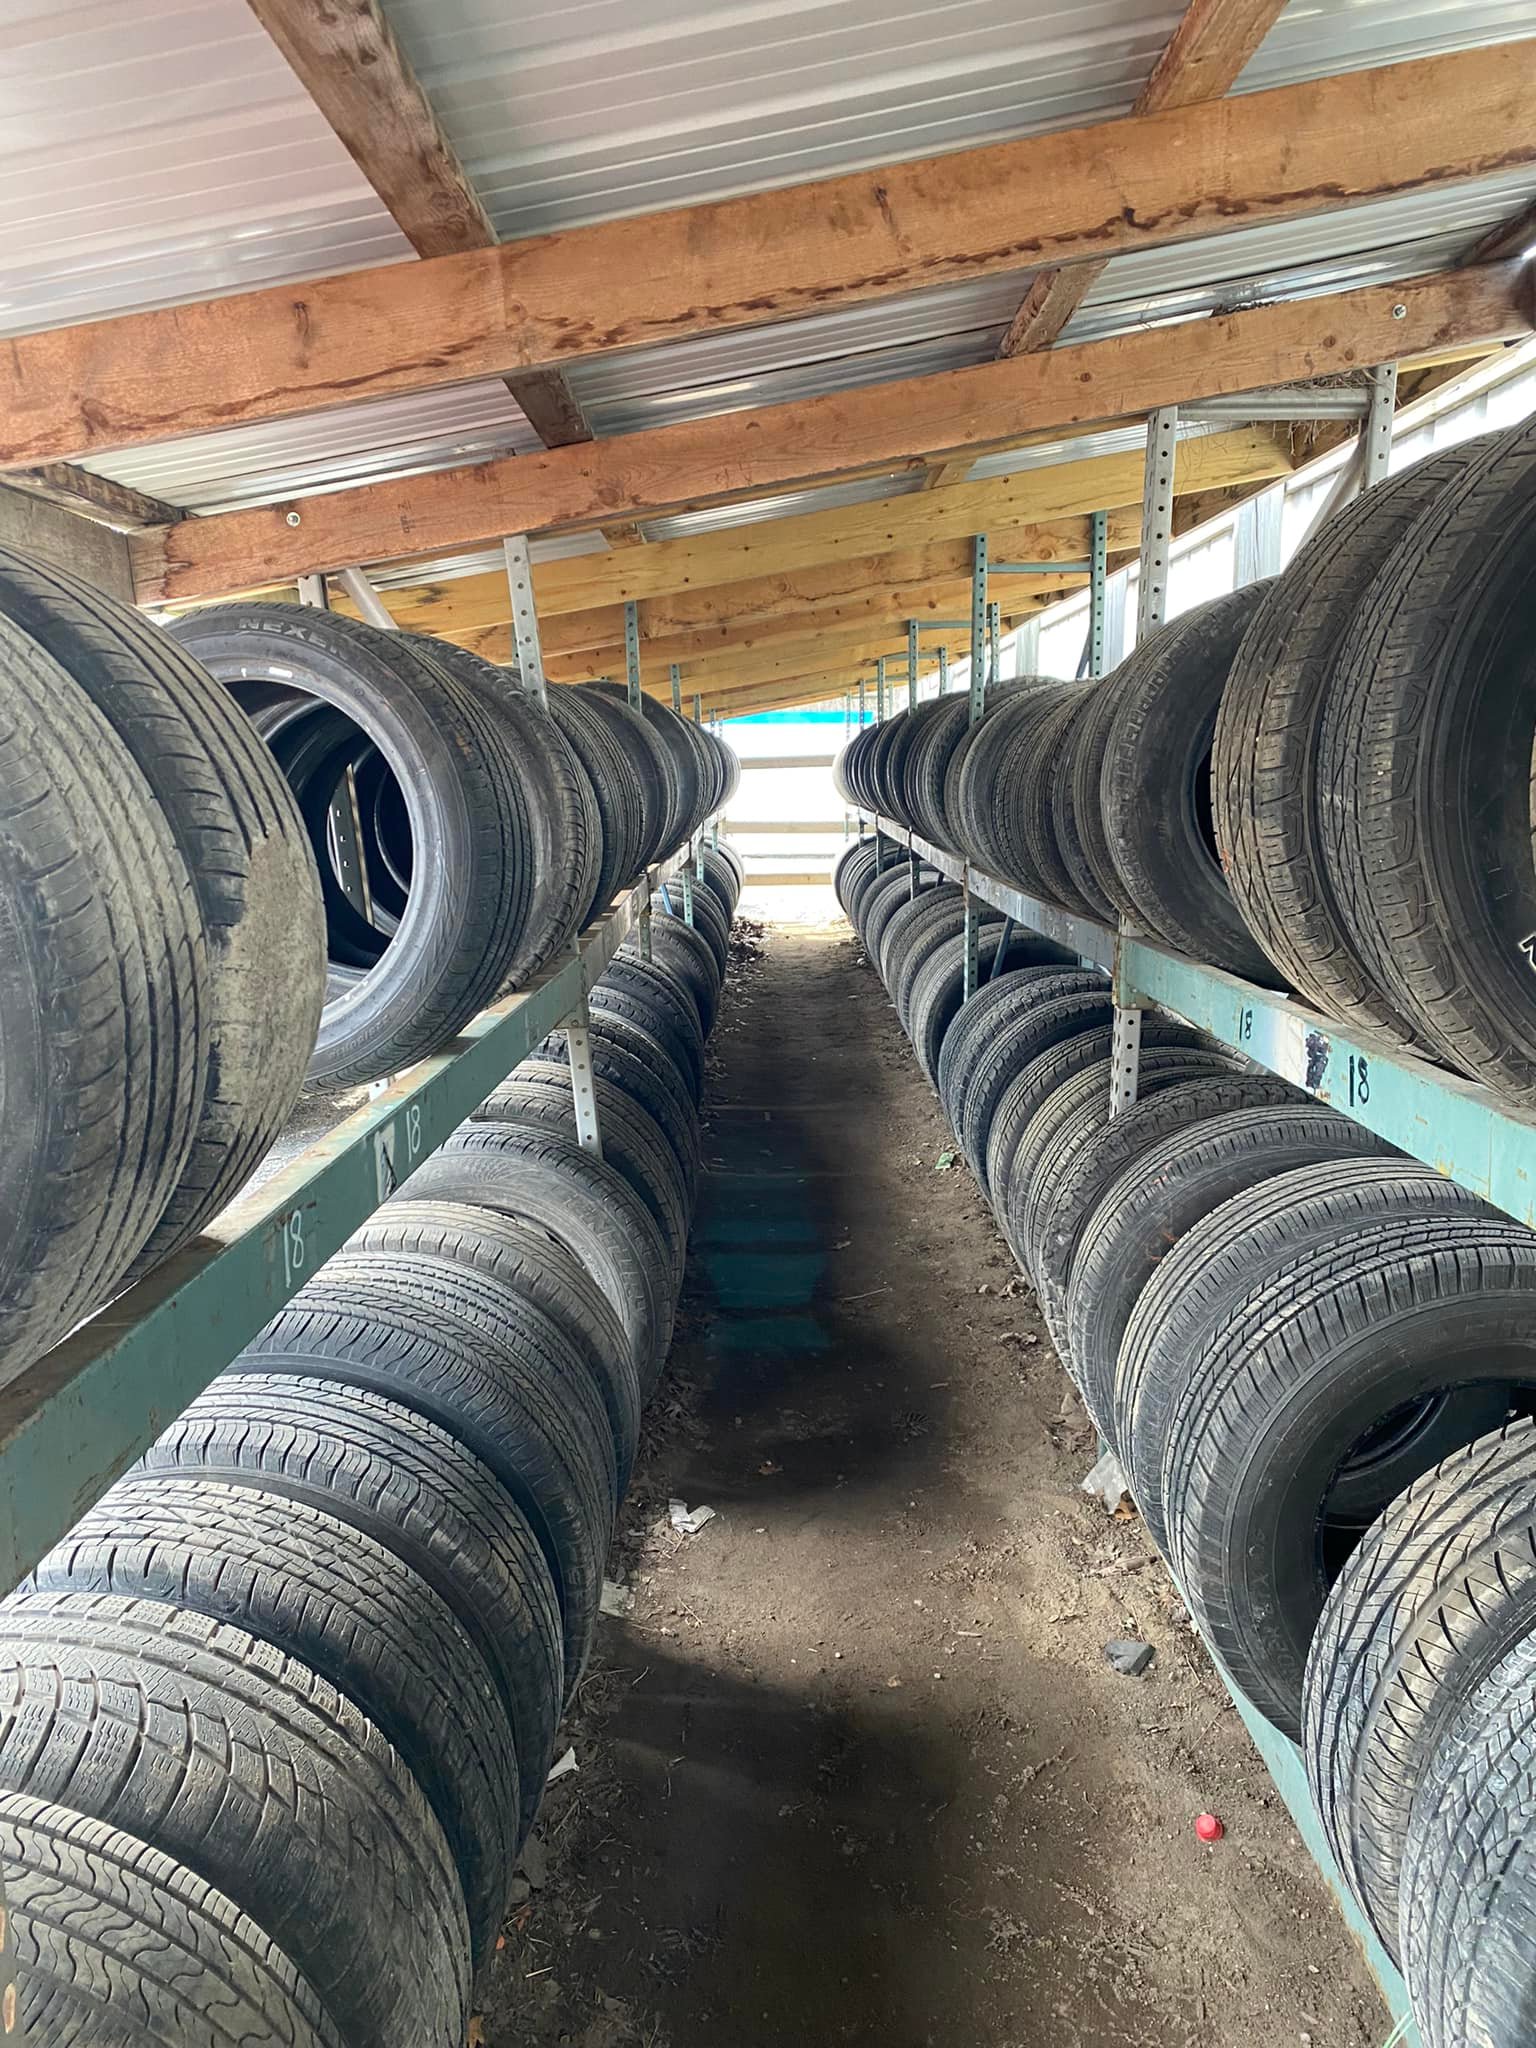 Buying Used Tires: Are They Safe, Should You Do It, & How Much Can You Save?